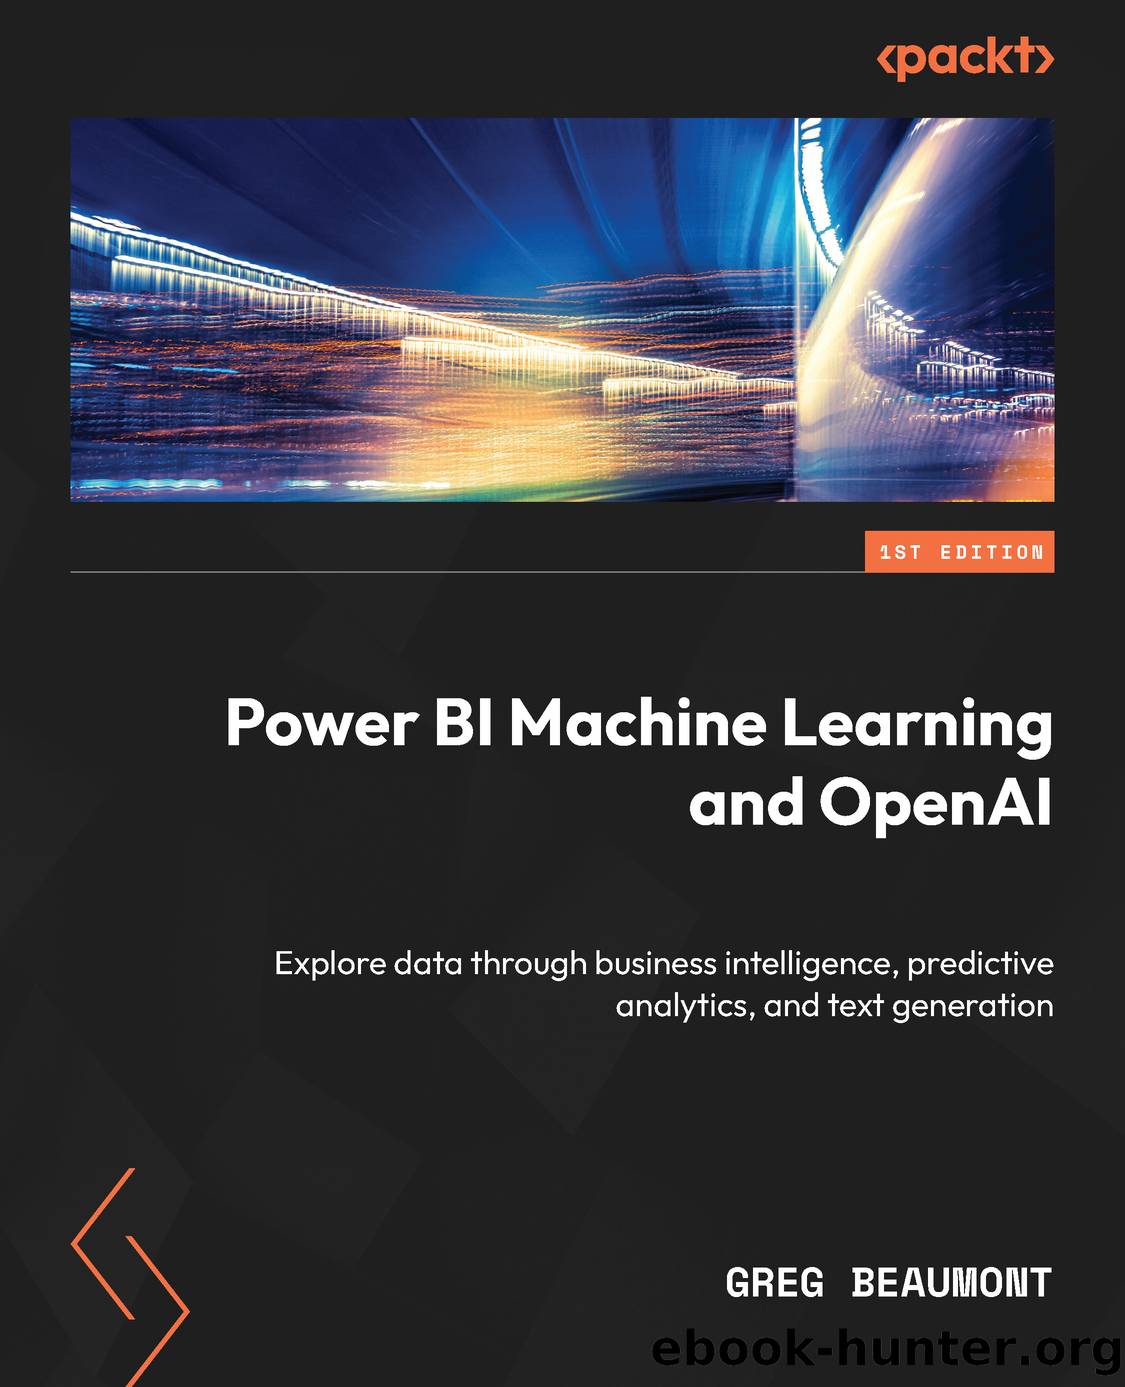 Power BI Machine Learning and OpenAI by Greg Beaumont